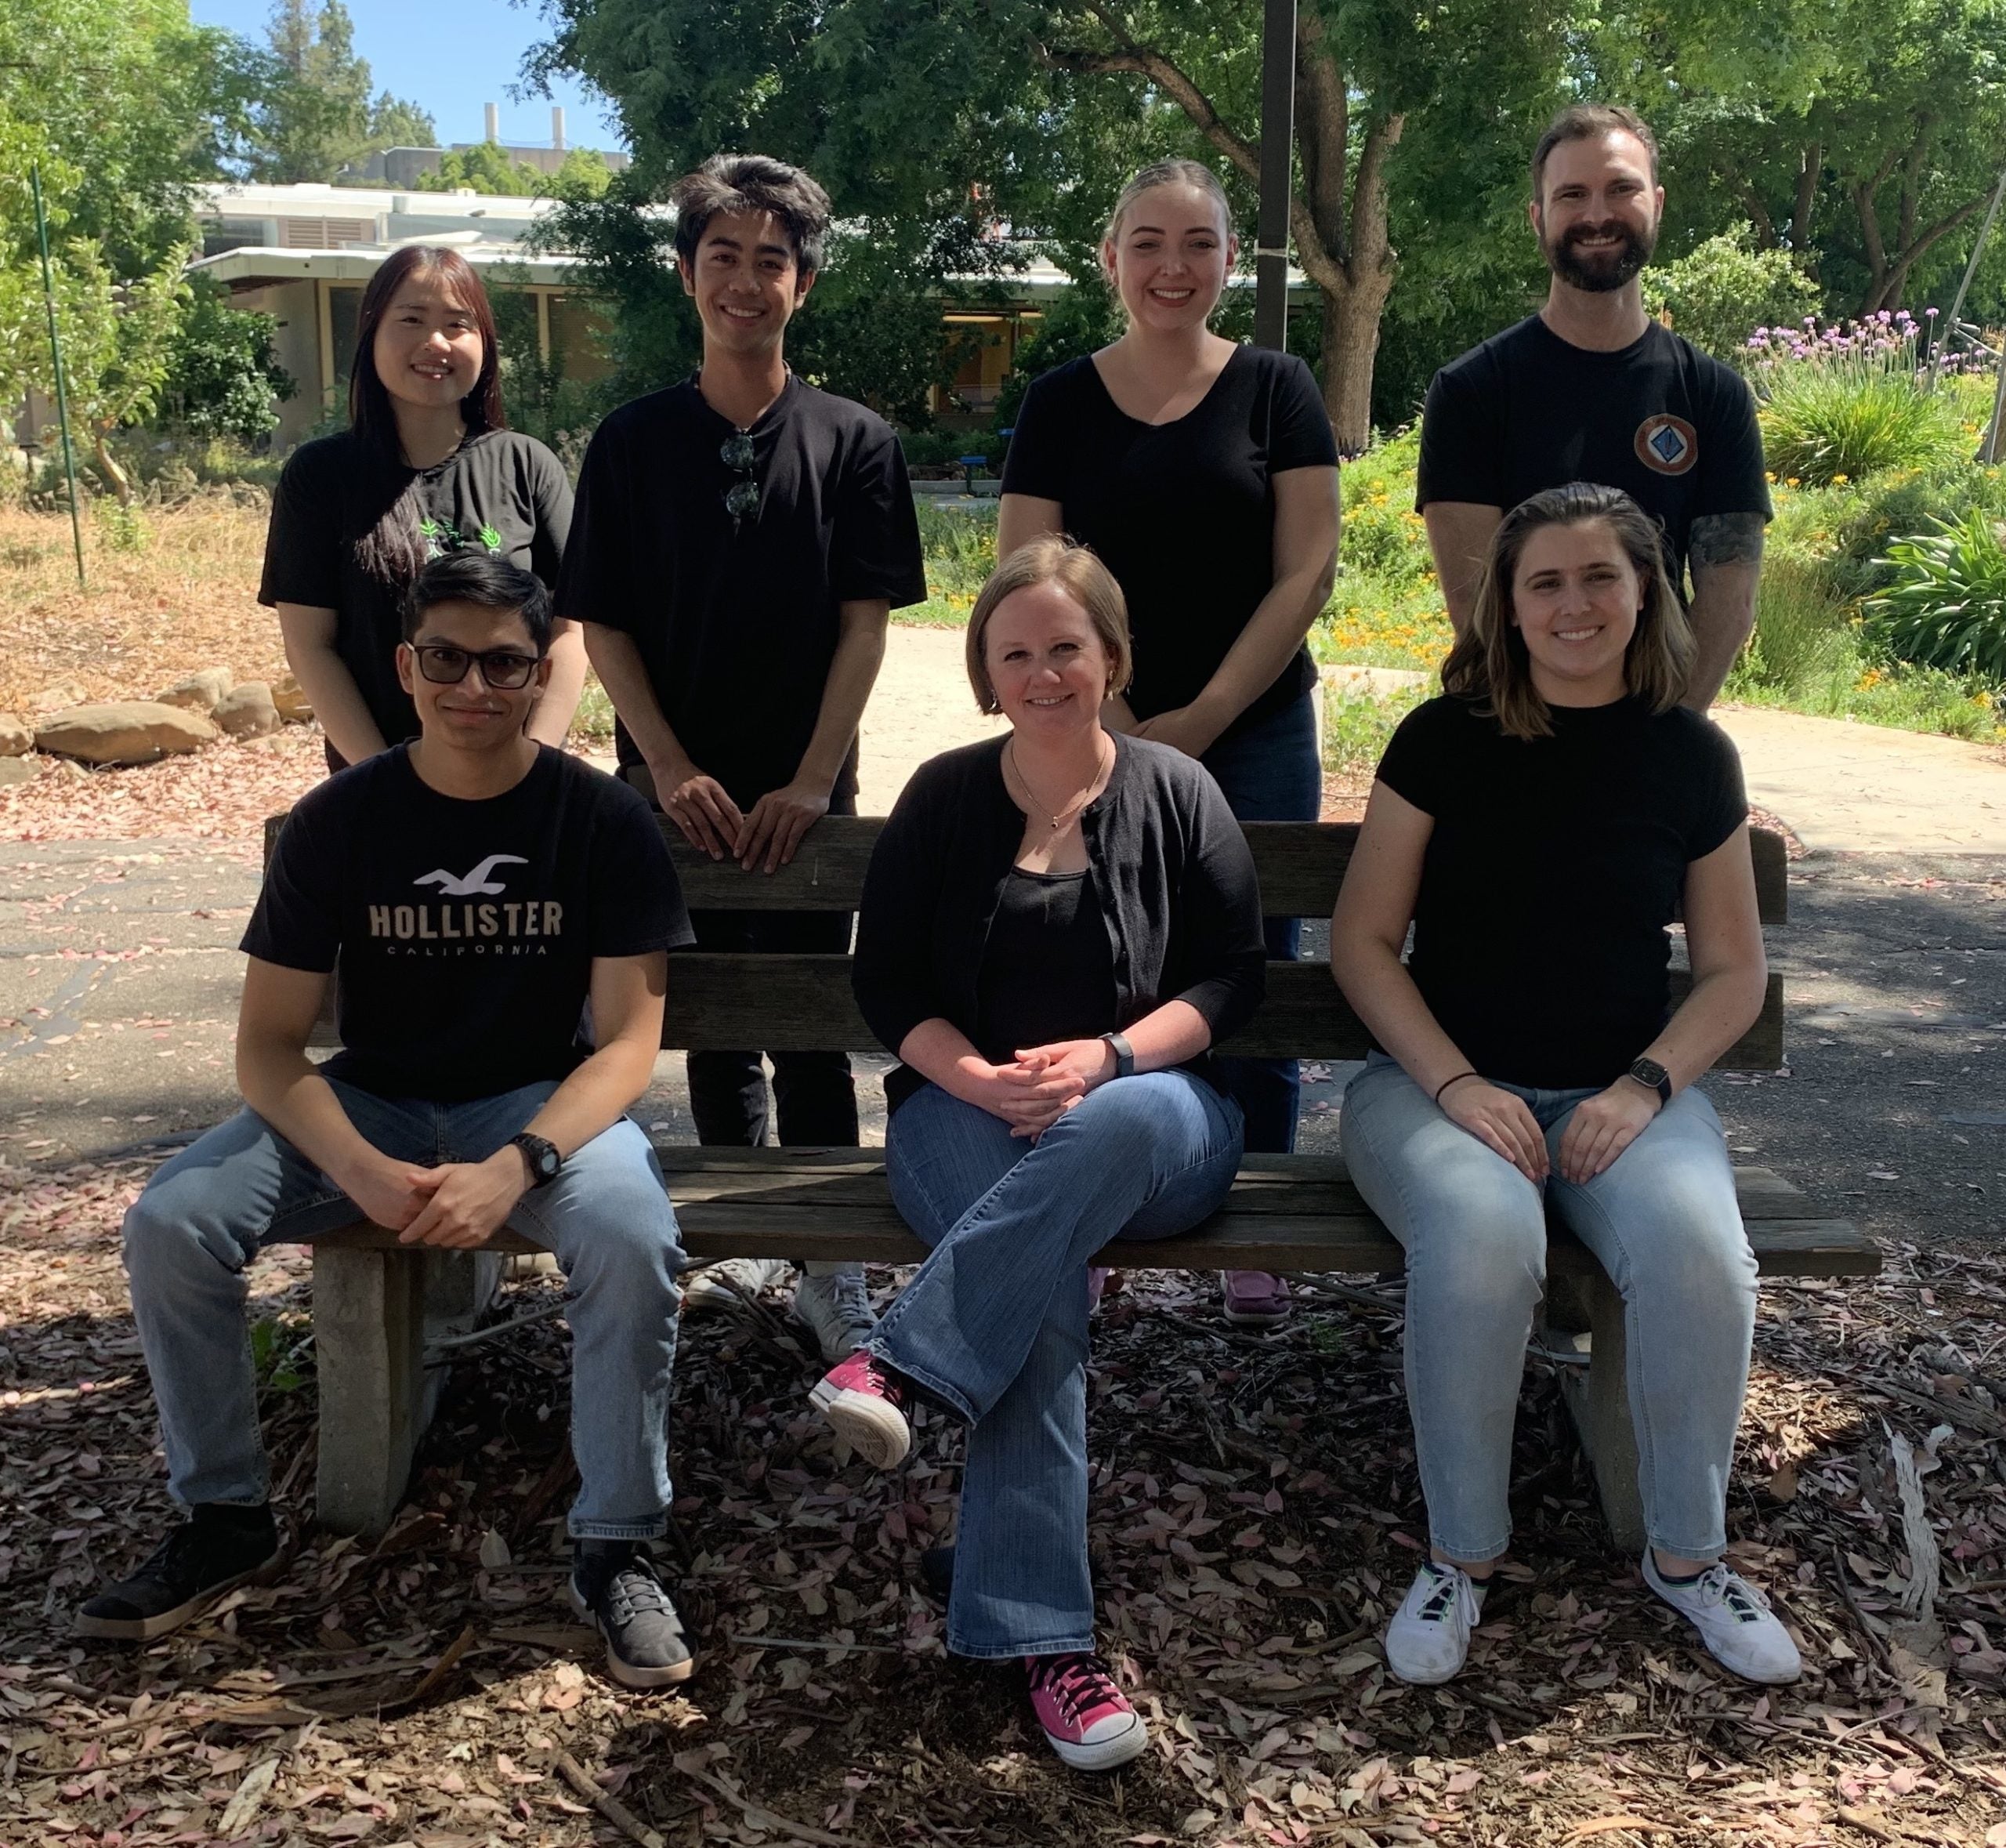 The Cash Lab dressed in black shirts and jeans